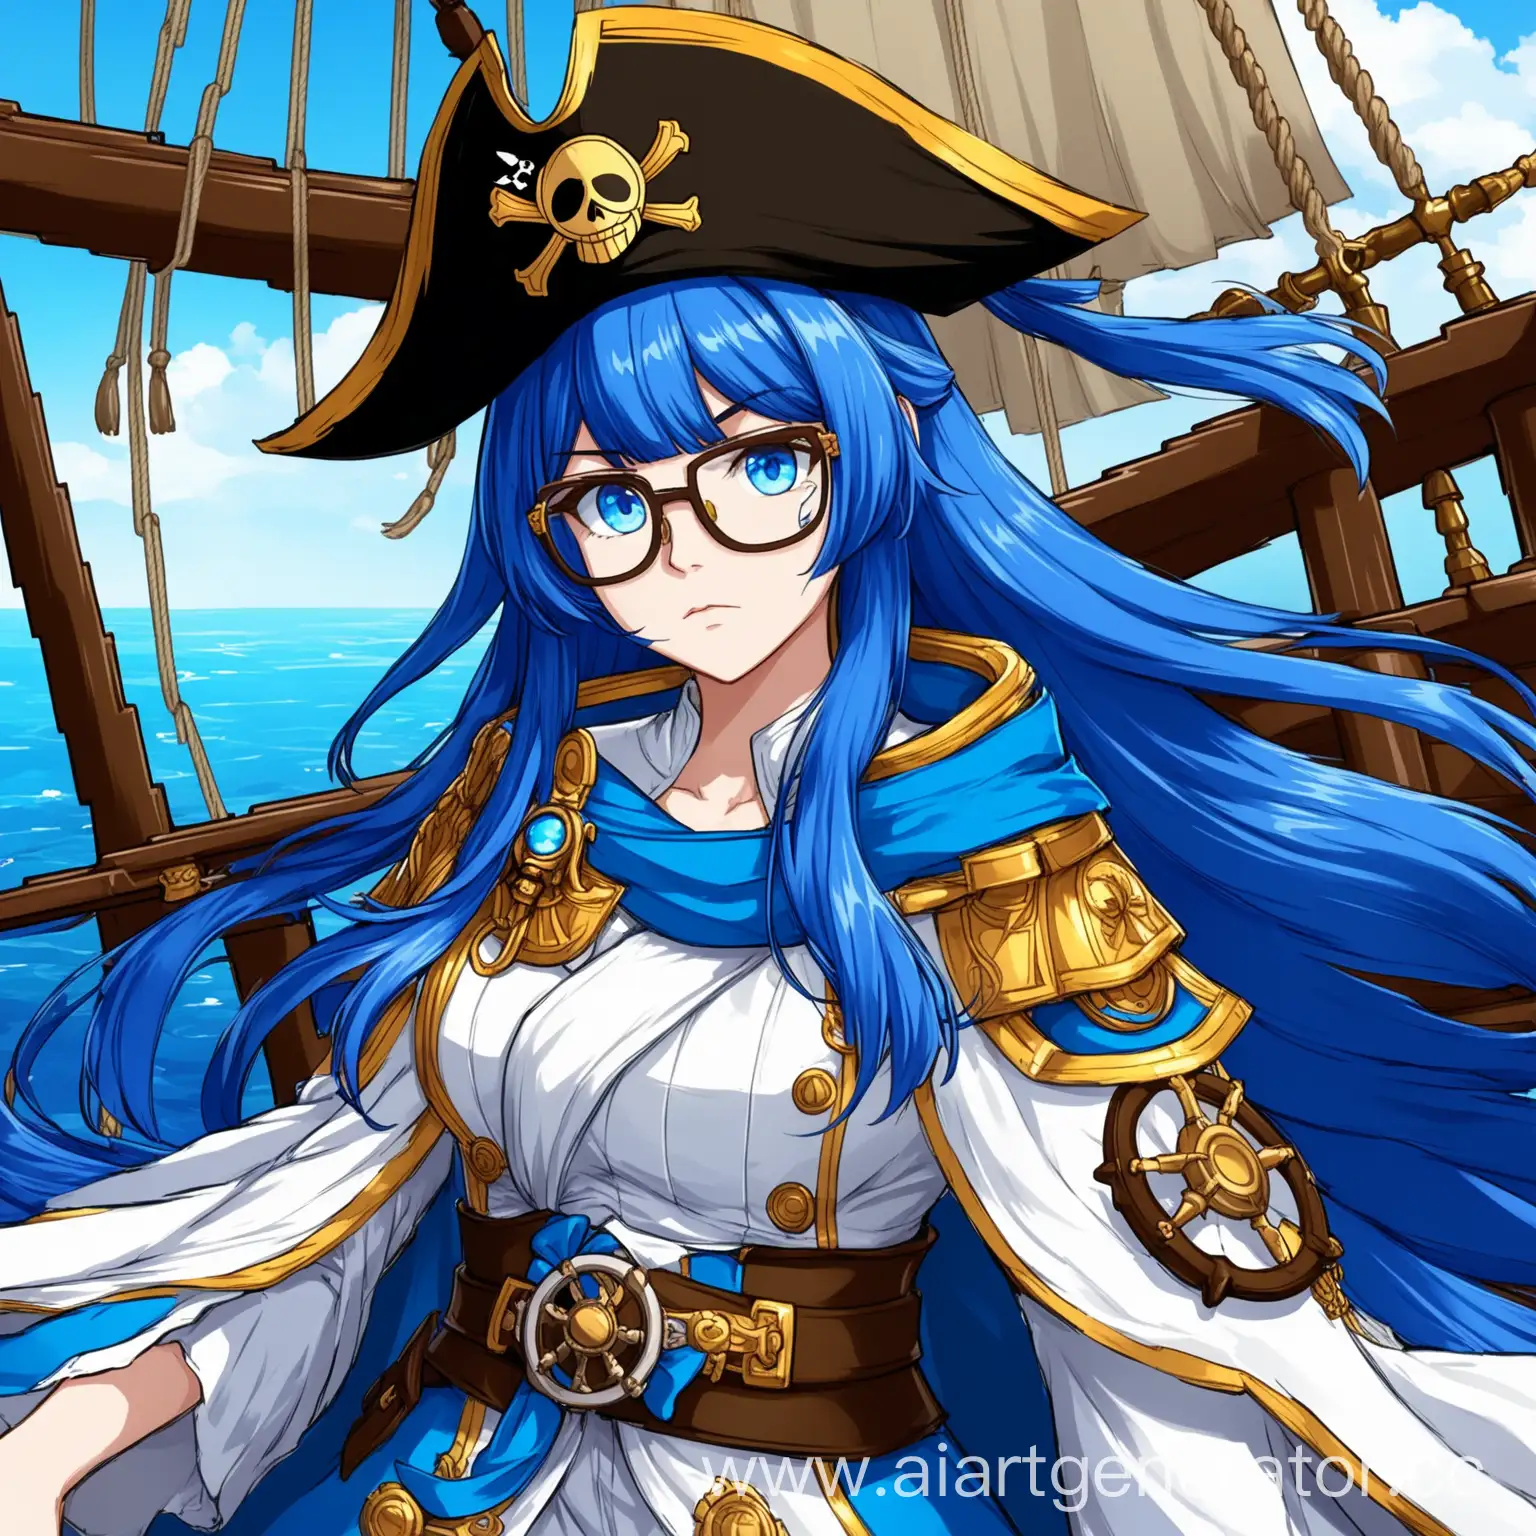 Serious-Anime-Girl-Pela-in-Pirate-Costume-at-the-Helm